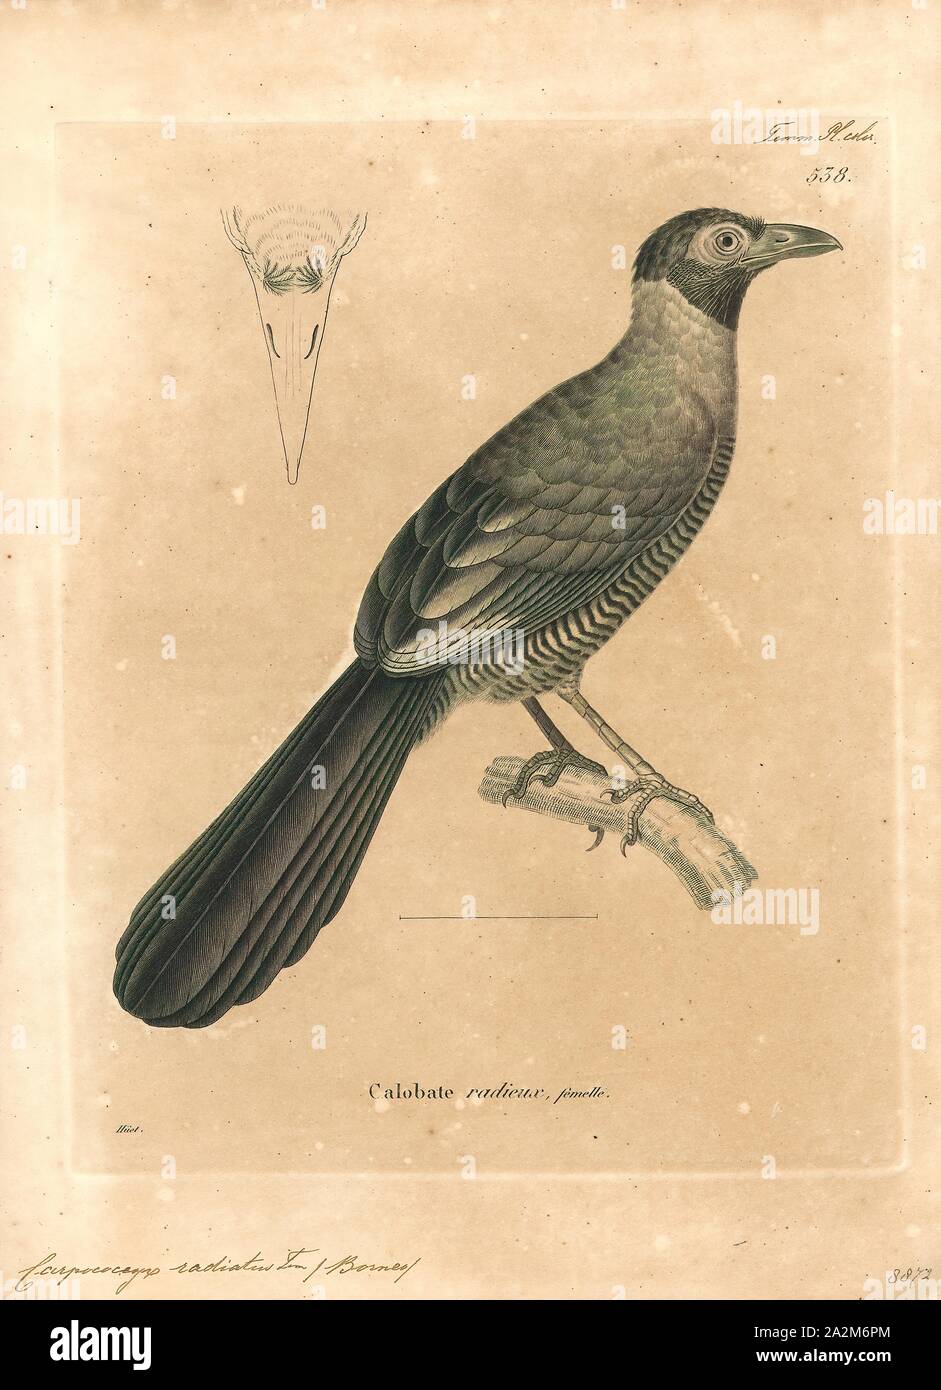 Carpococcyx radiatus, Print, The Bornean ground cuckoo (Carpococcyx radiceus) is a large terrestrial species of cuckoo in the Cuculidae family. It is, as suggested by its common name, endemic to the island of Borneo, being found in the sections belonging to Brunei, Malaysia and Indonesia. It is restricted to humid forest. It is threatened by habitat loss. It was formerly considered conspecific with the Sumatran ground cuckoo., 1700-1880 Stock Photo